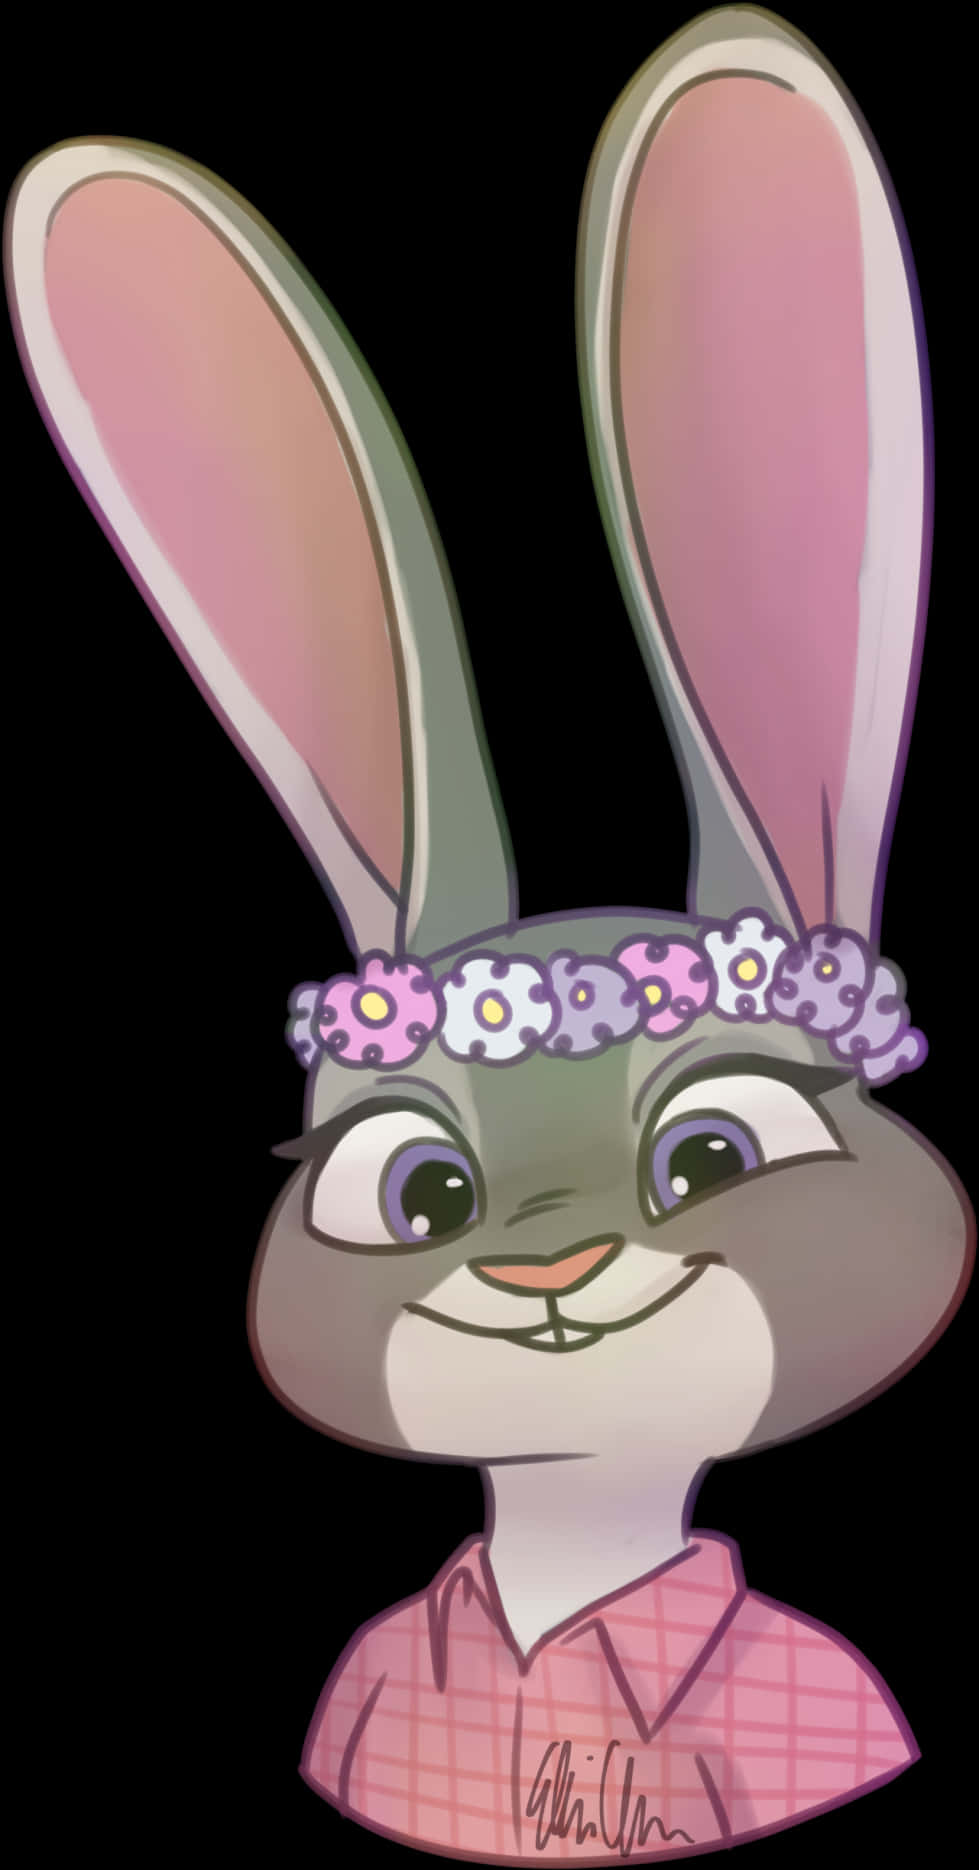 A Cartoon Of A Rabbit With Flowers On Its Head